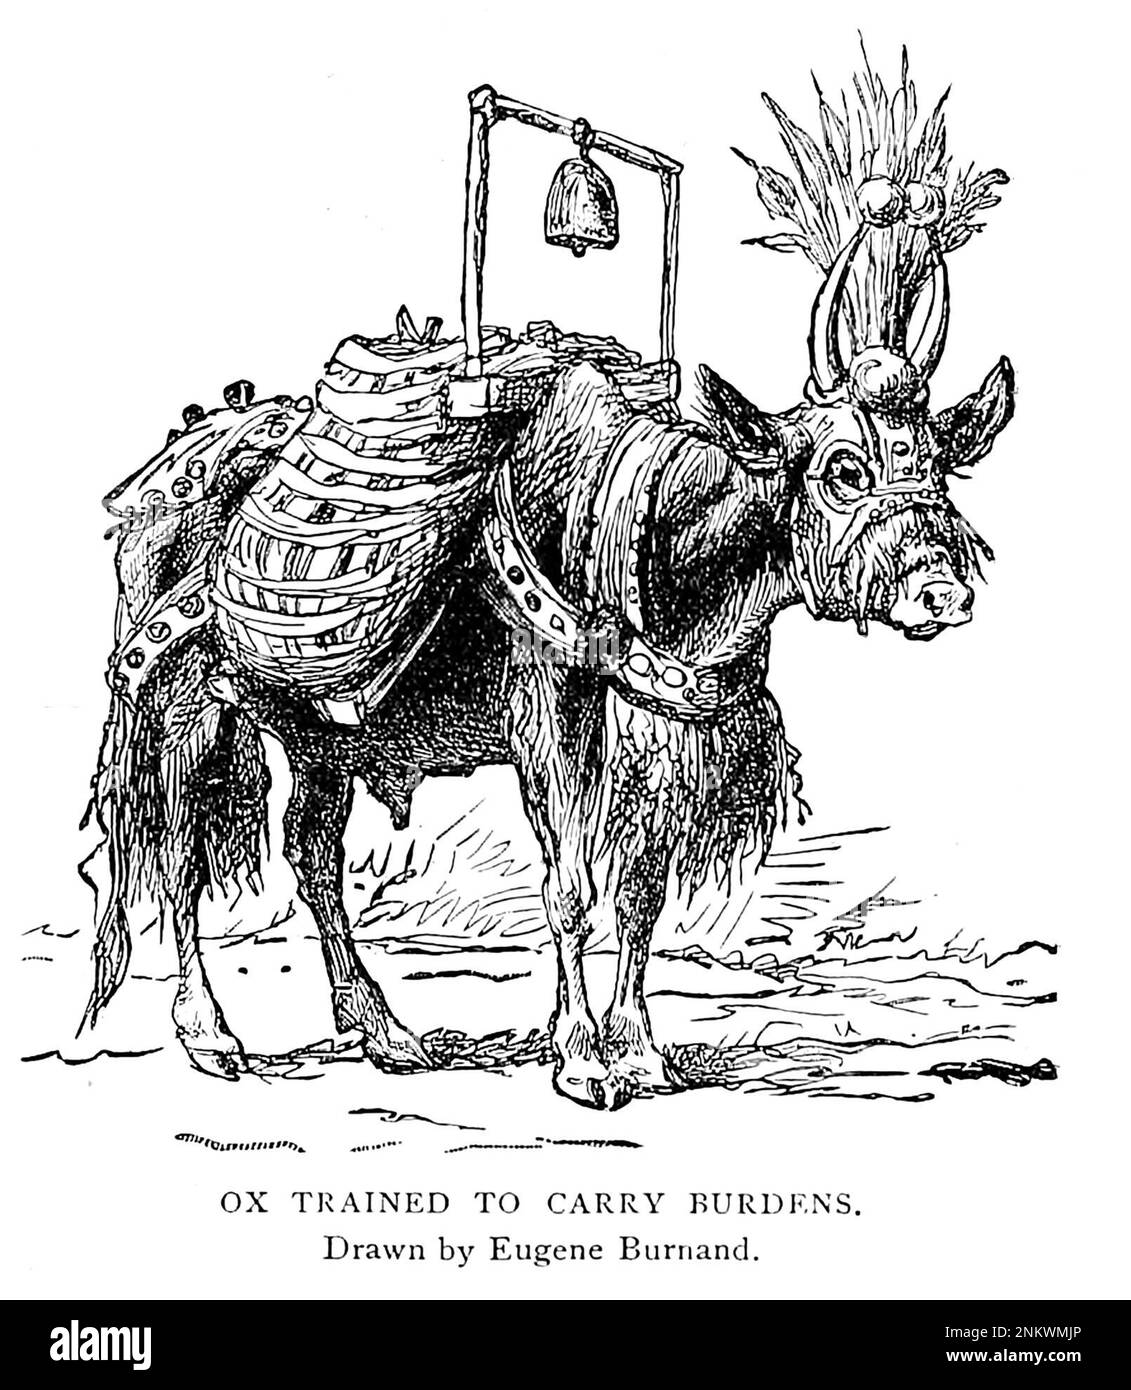 OX TRAINED TO CARRY BURDENS Drawn by Eugene Burnard The Brown Races Malayo-Mongoloids from Cyclopedia universal history : embracing the most complete and recent presentation of the subject in two principal parts or divisions of more than six thousand pages by John Clark Ridpath, 1840-1900 Publication date 1895 Publisher Boston : Balch Bros. Volume 6 History of Man and Mankind Stock Photo